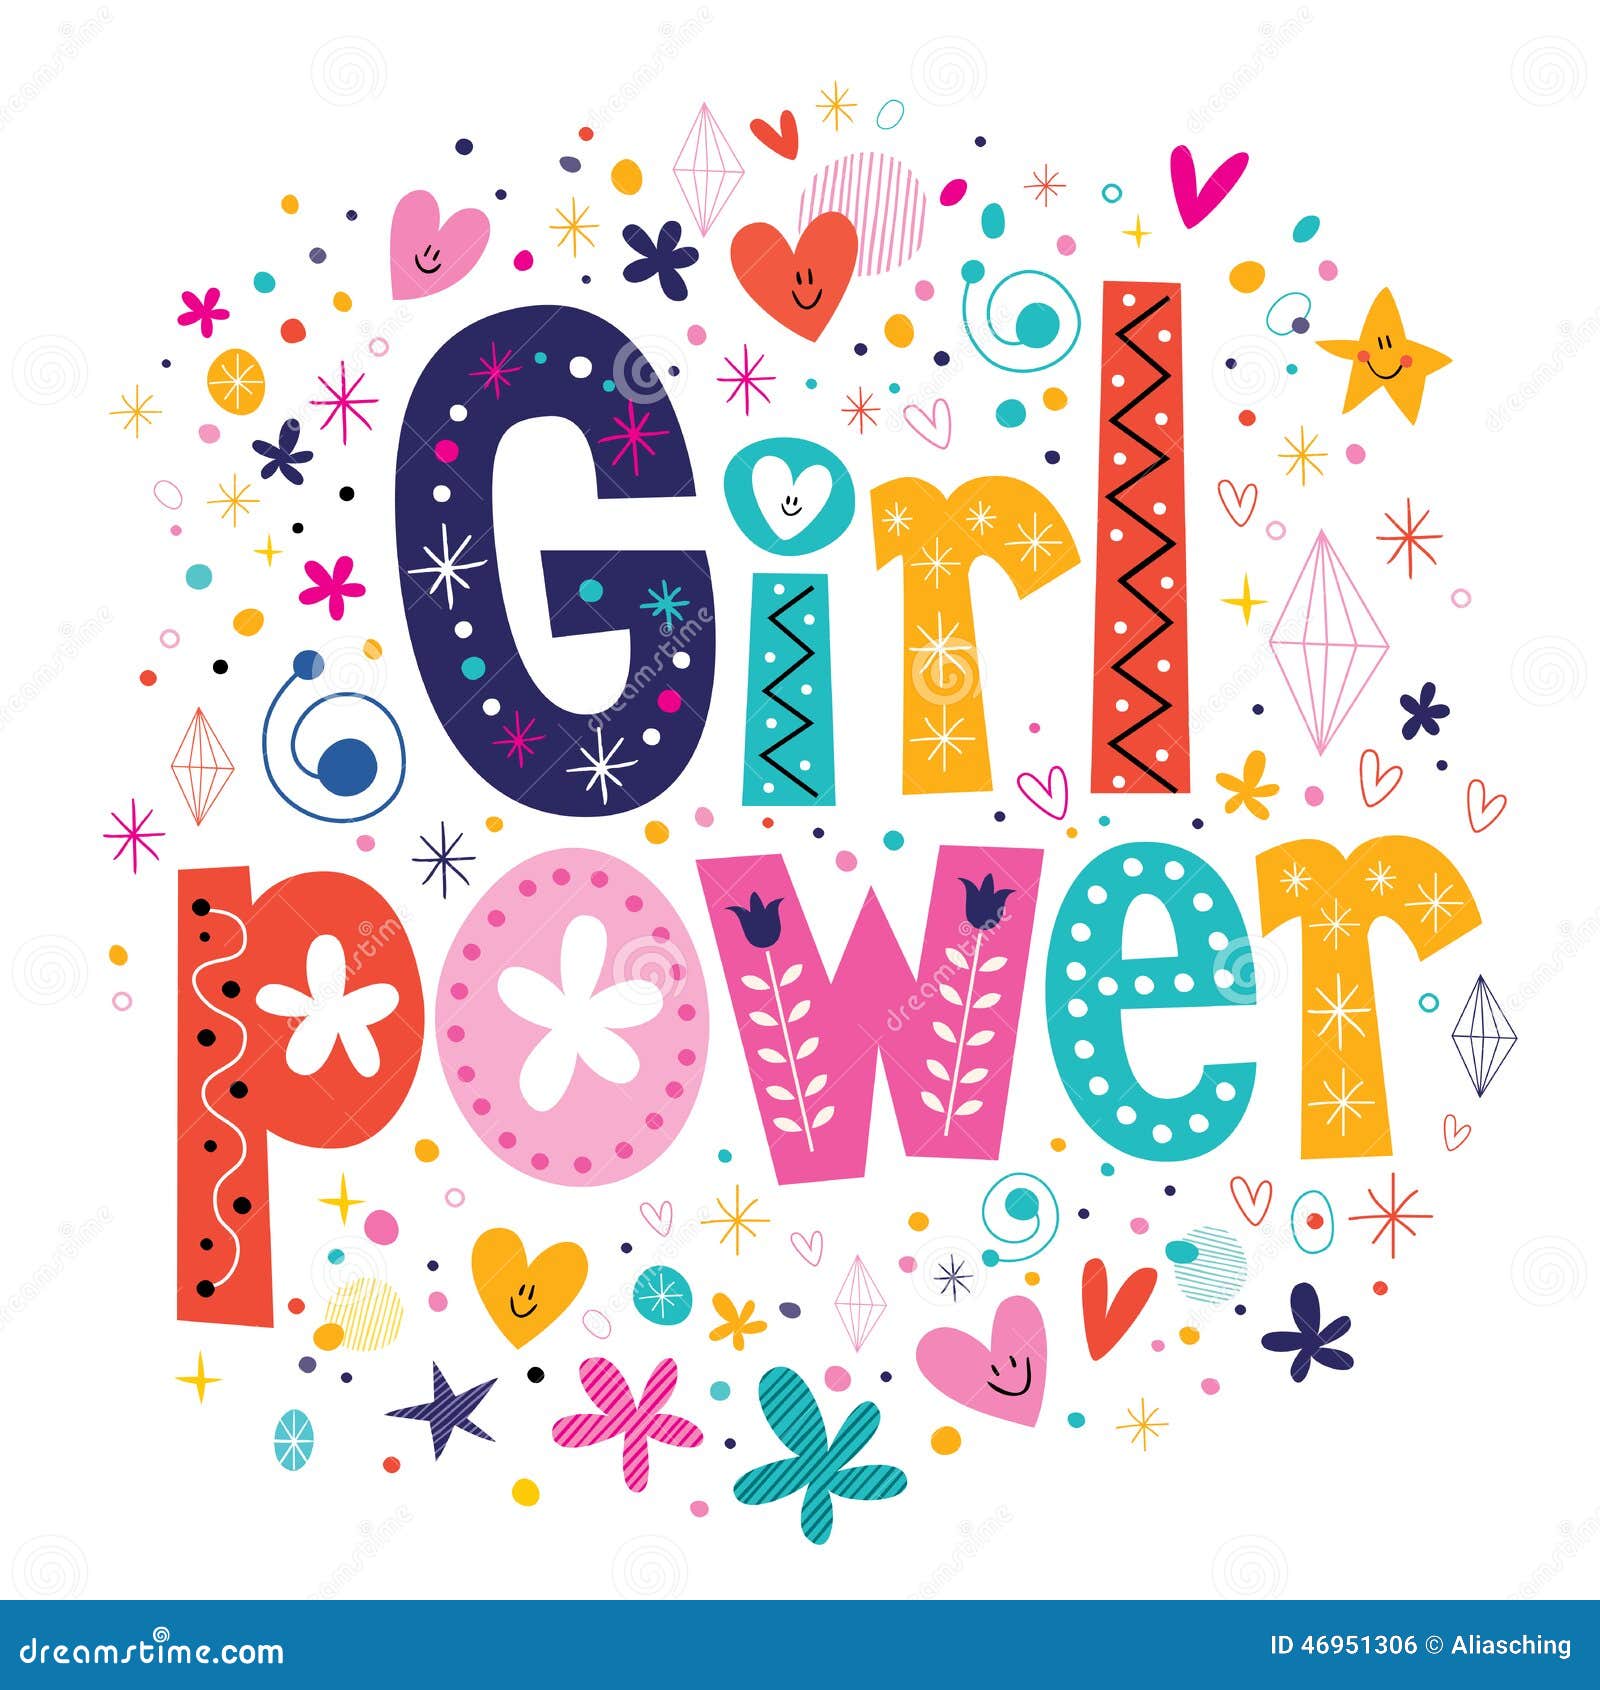 girl power clipart free - photo #3